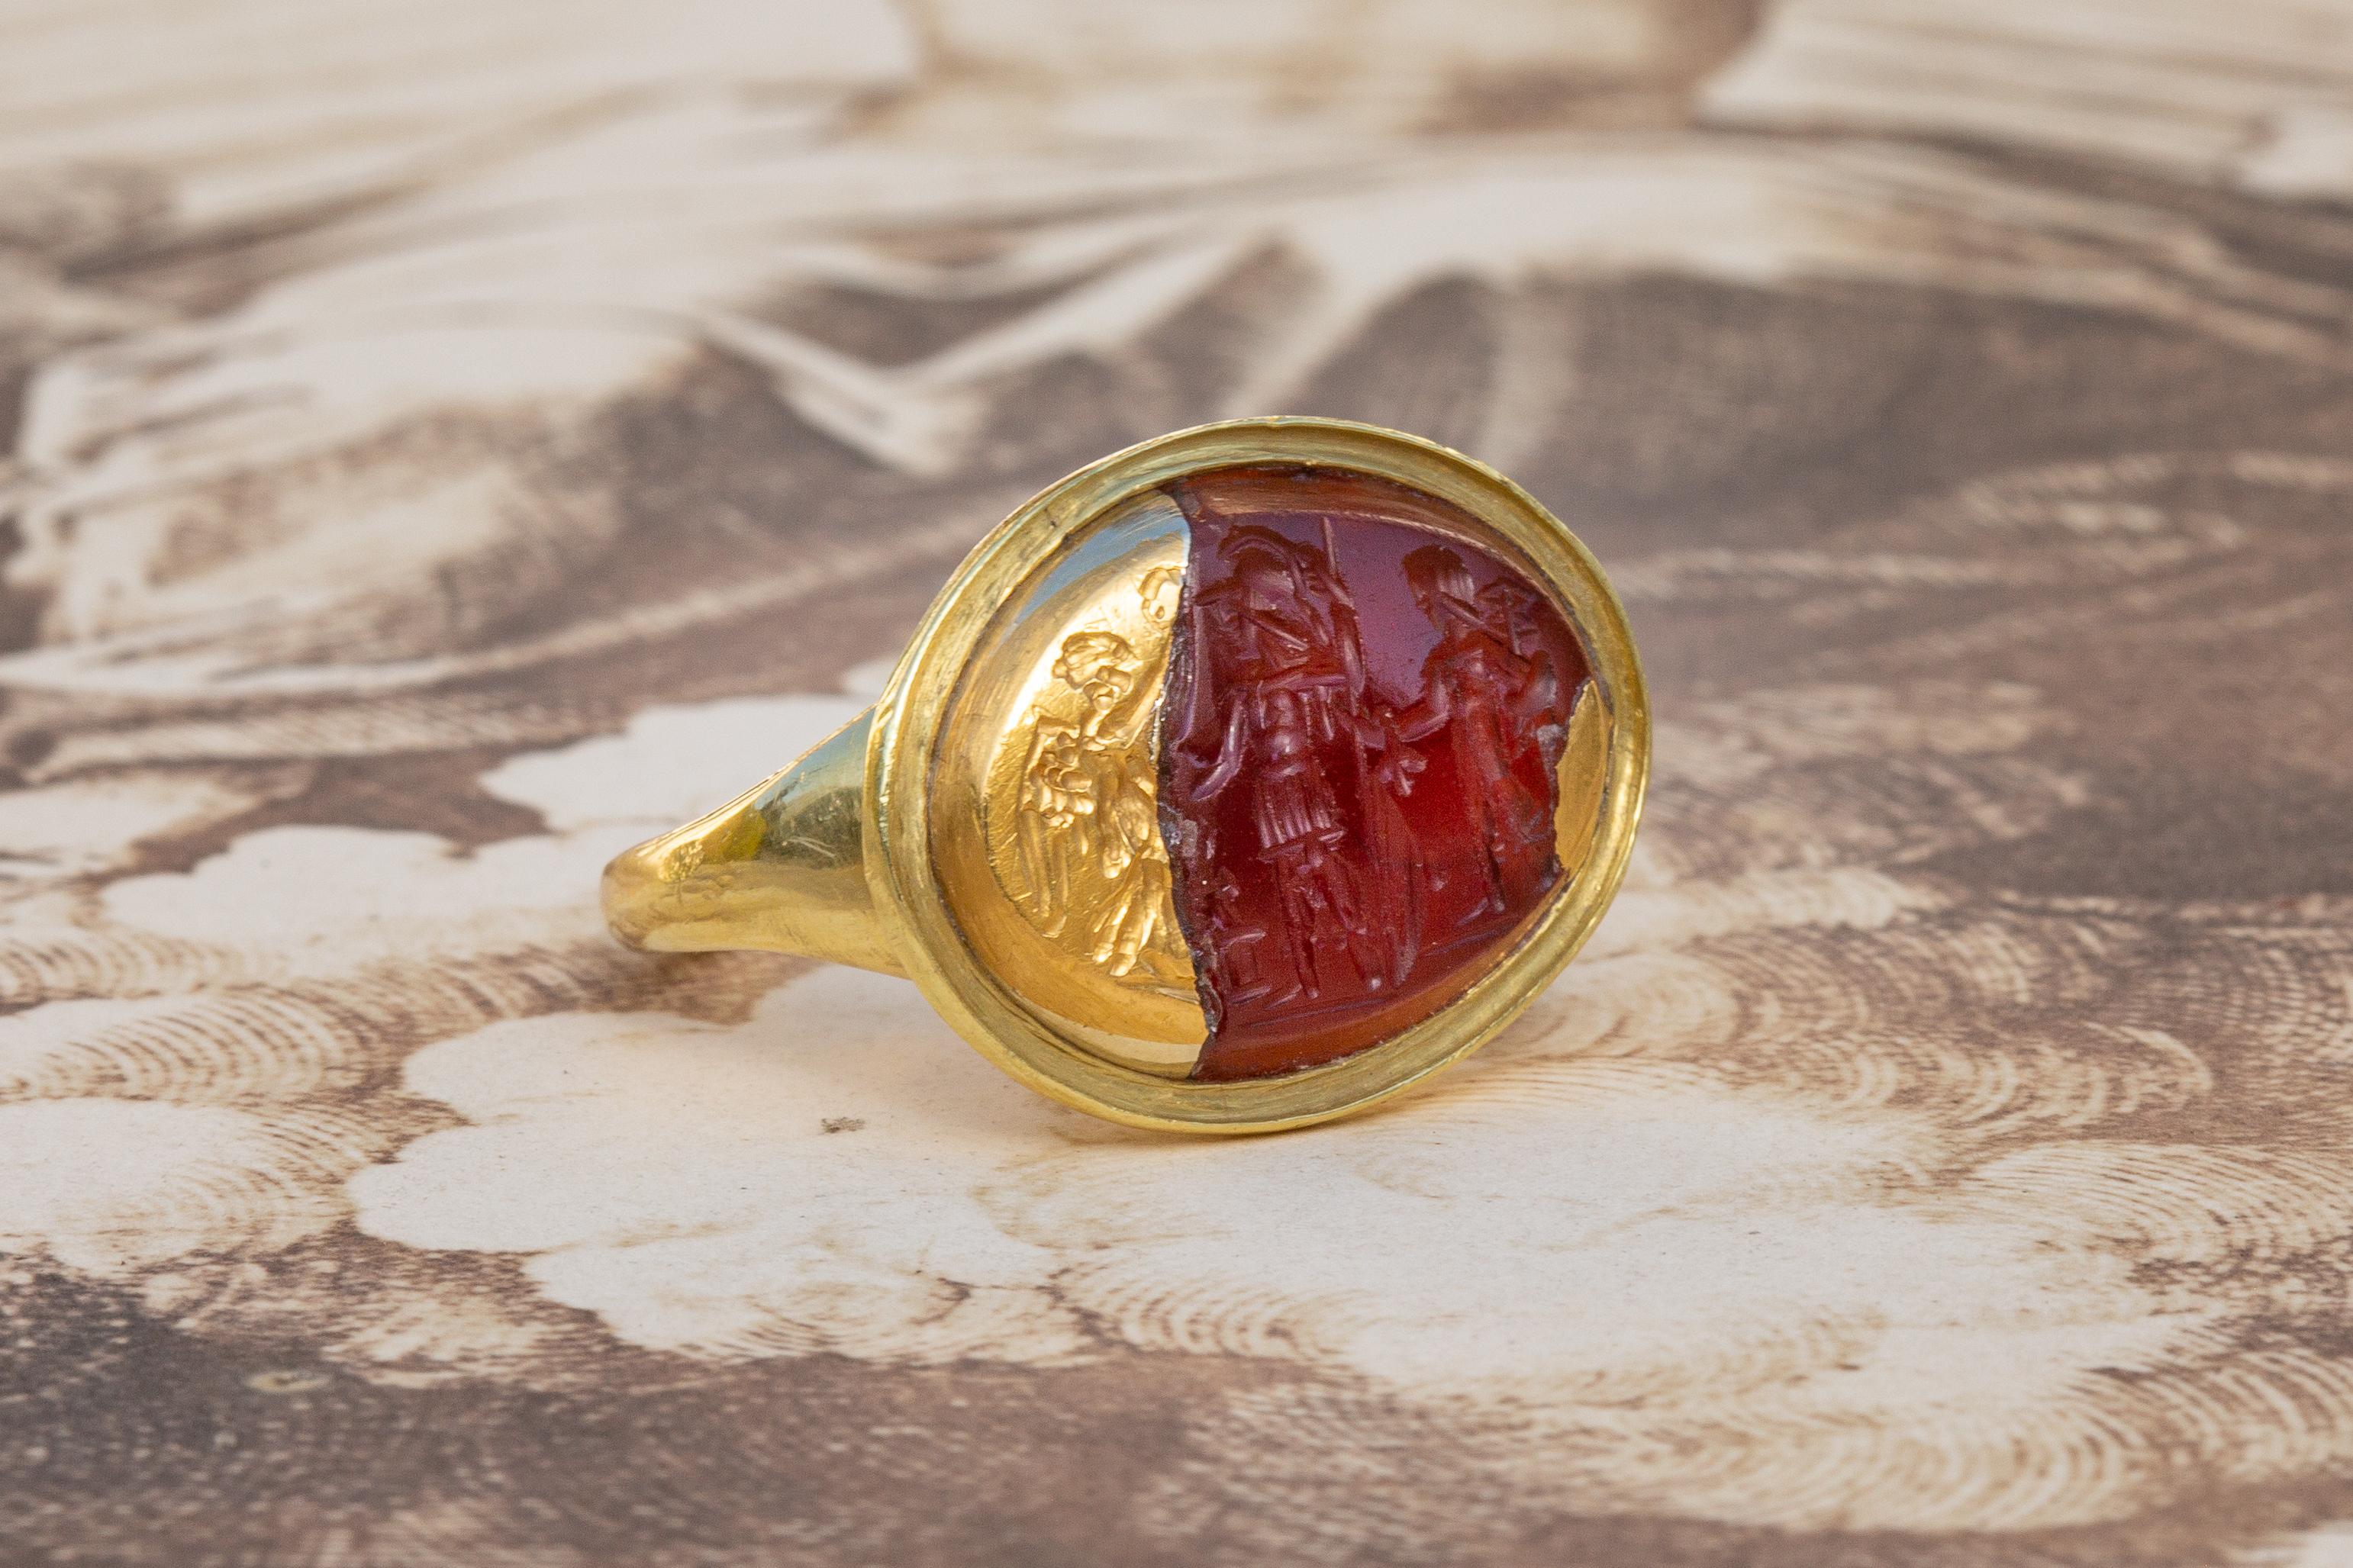 Classical Roman Scarce Ancient Roman Carnelian Intaglio of NIKE and Warriors in 21k Gold Signet